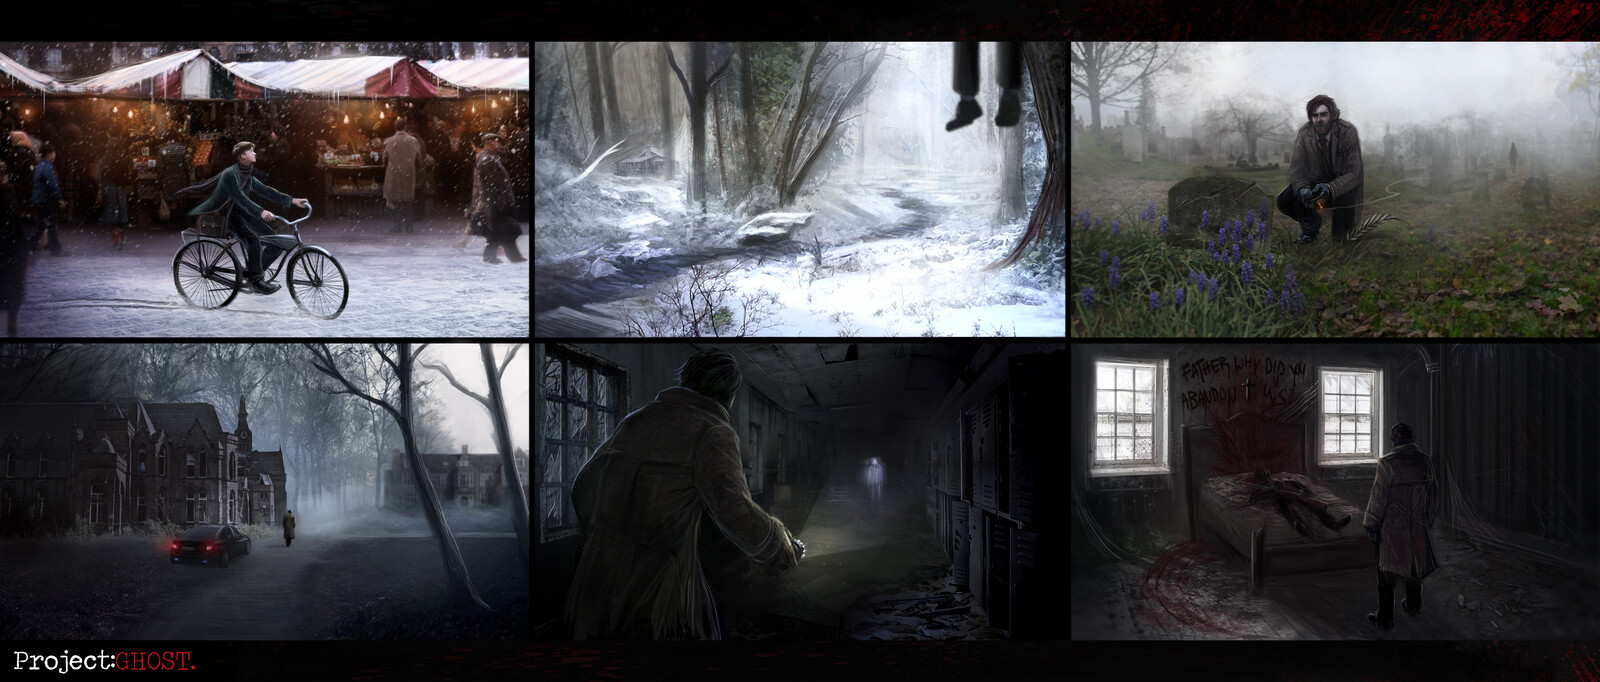 Project GHOST: Storyboard/Environment Thumbnails